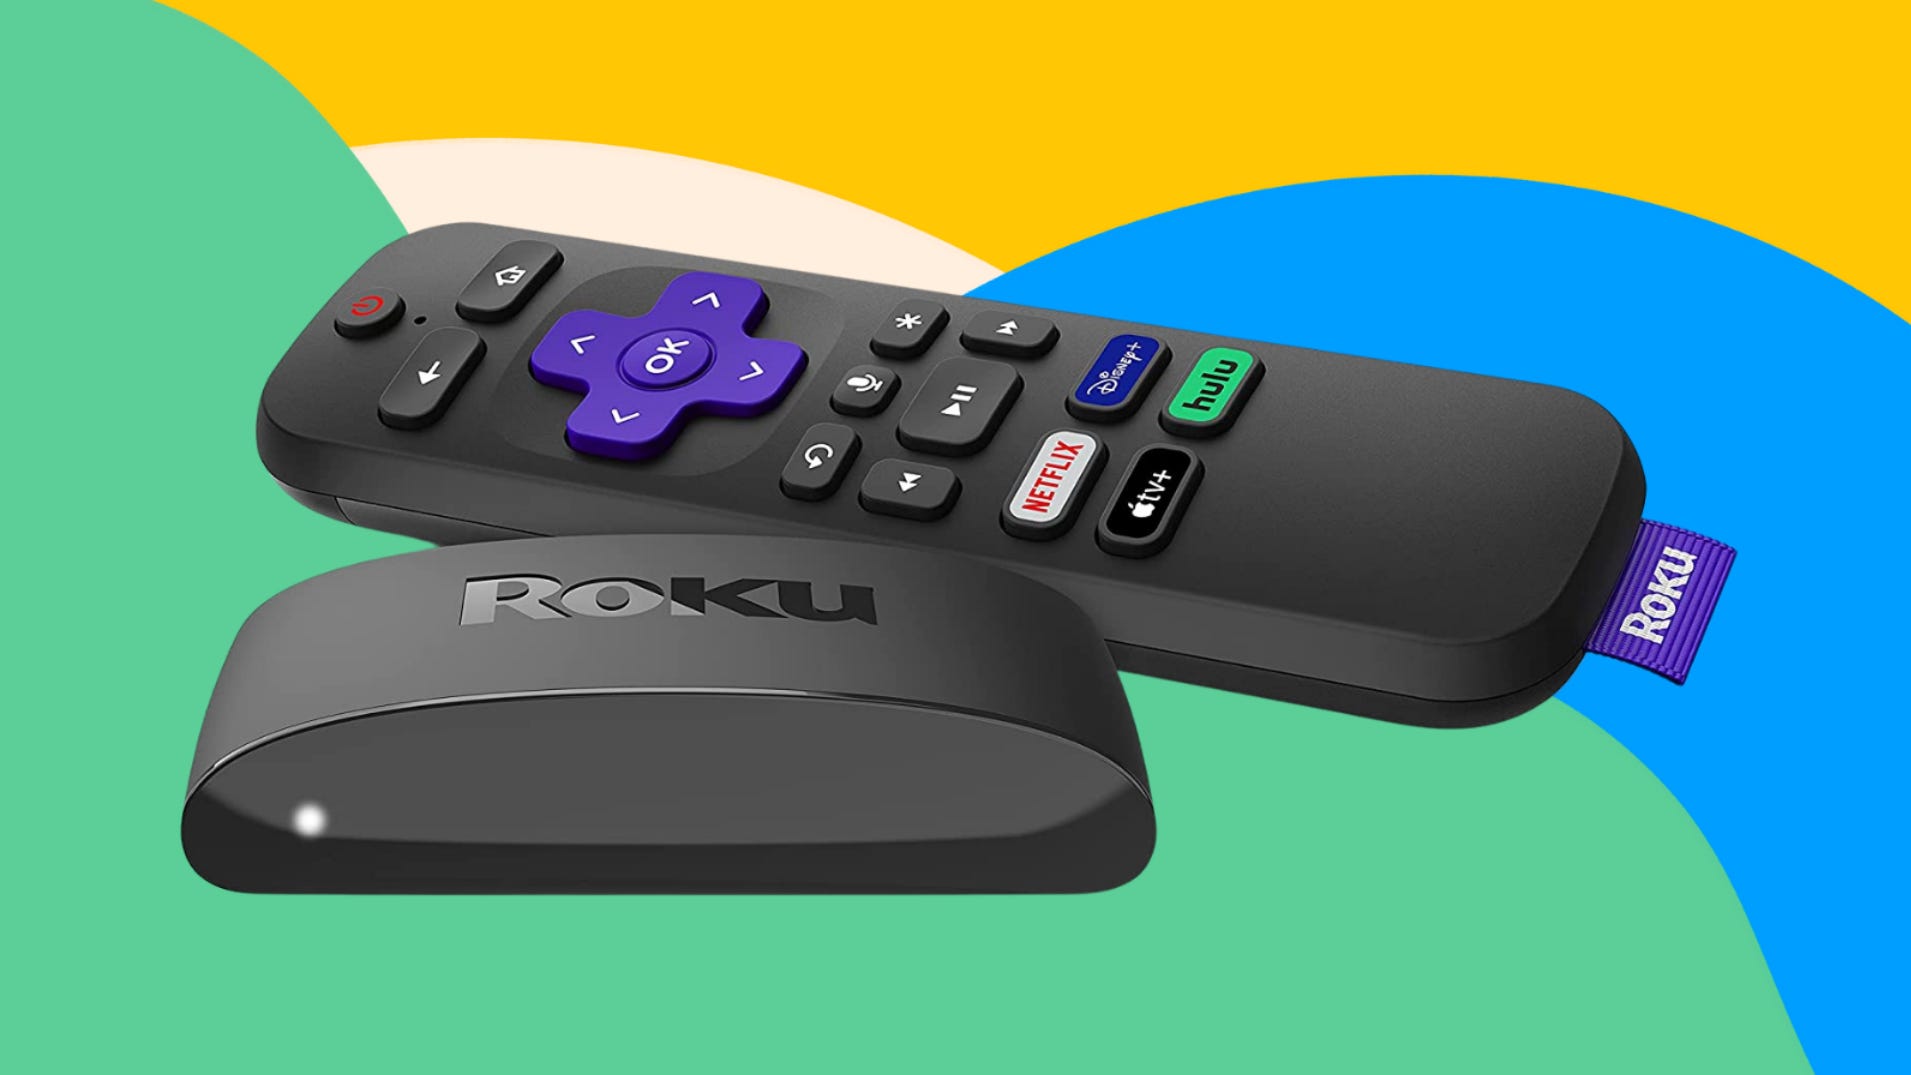 Roku Get one of the best streaming devices for less than 30